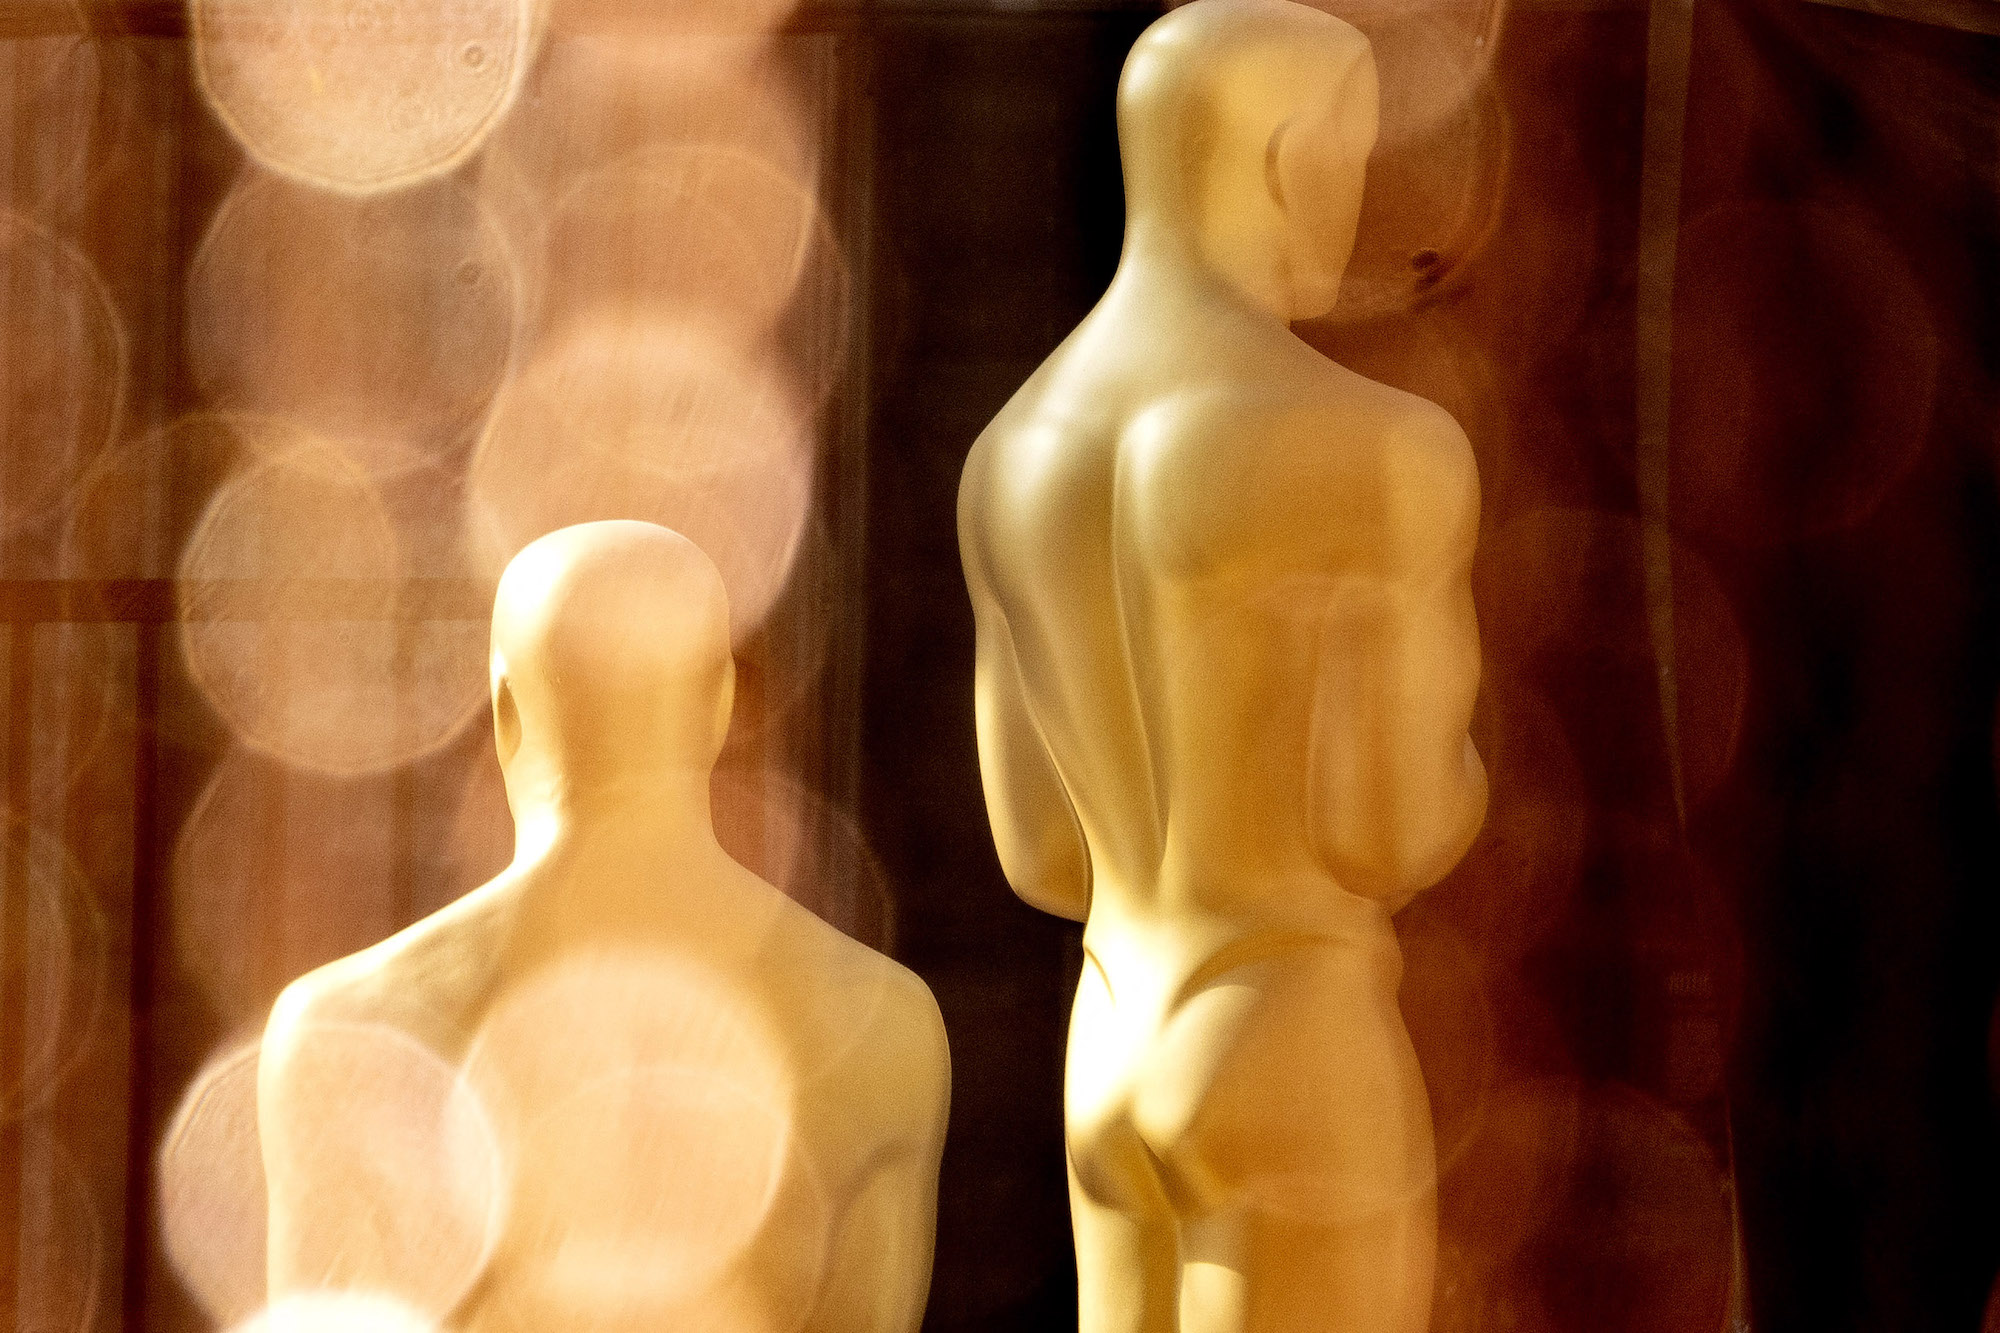 Oscars statues at the Dolby Theater